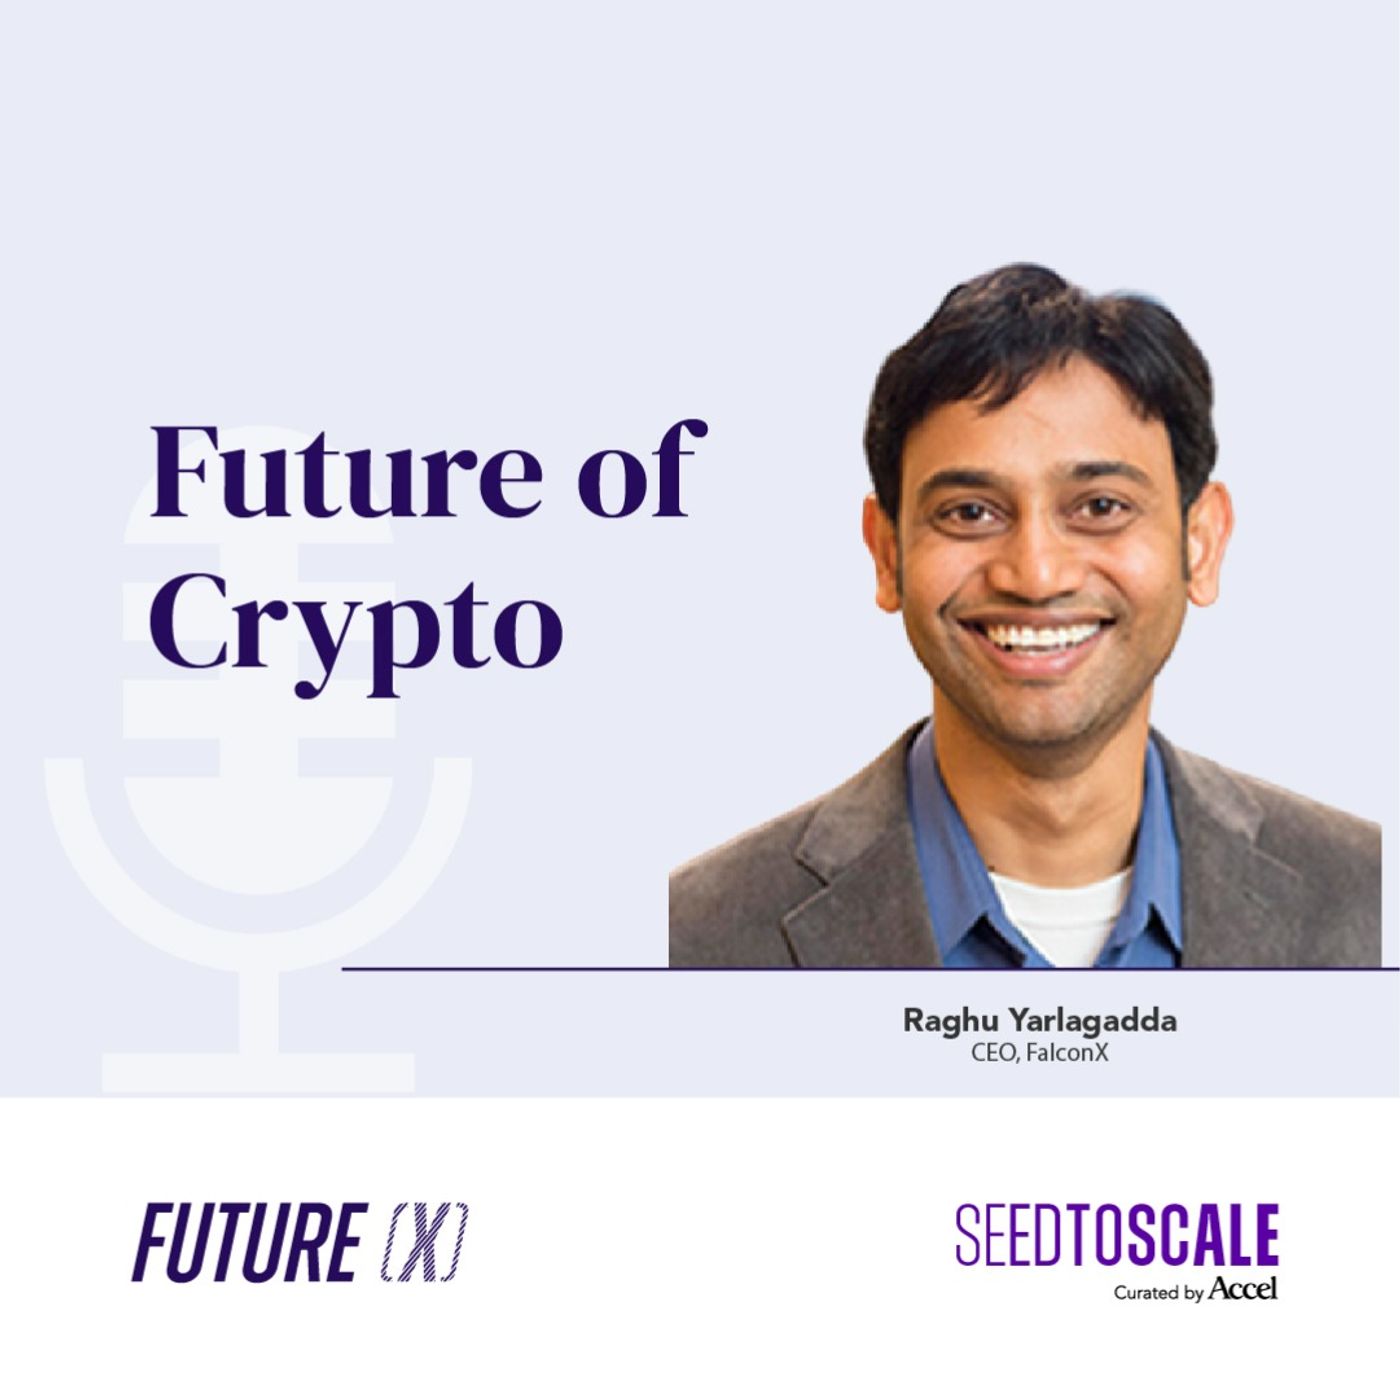 INSIGHTS #73: Future of Crypto | Raghu Yarlagadda on FalconX’s flight and what it means